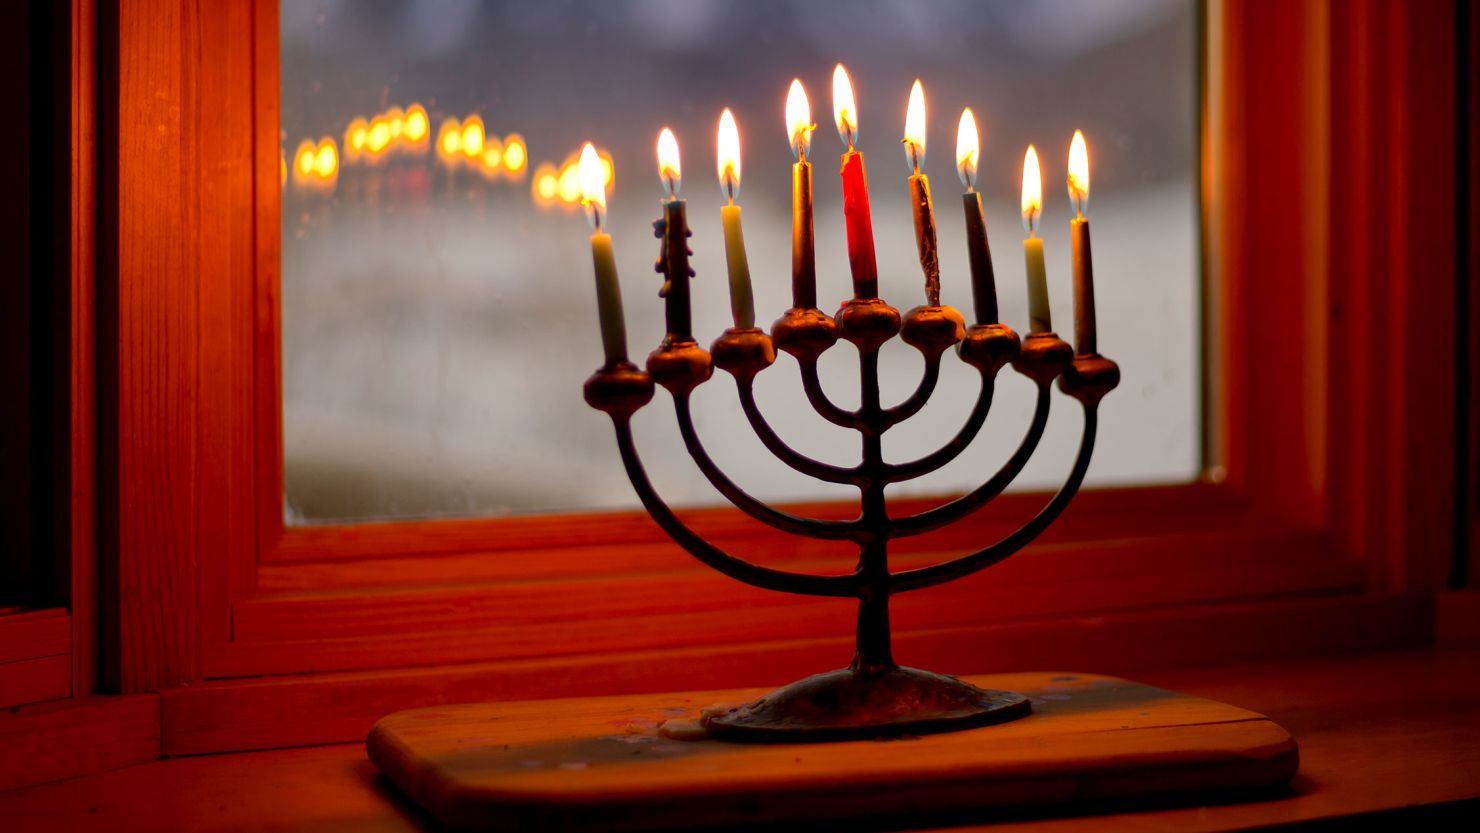 Public menorah lightings are being cancelled around the world for fears of violence and other related reasons, writes Amy Klein.